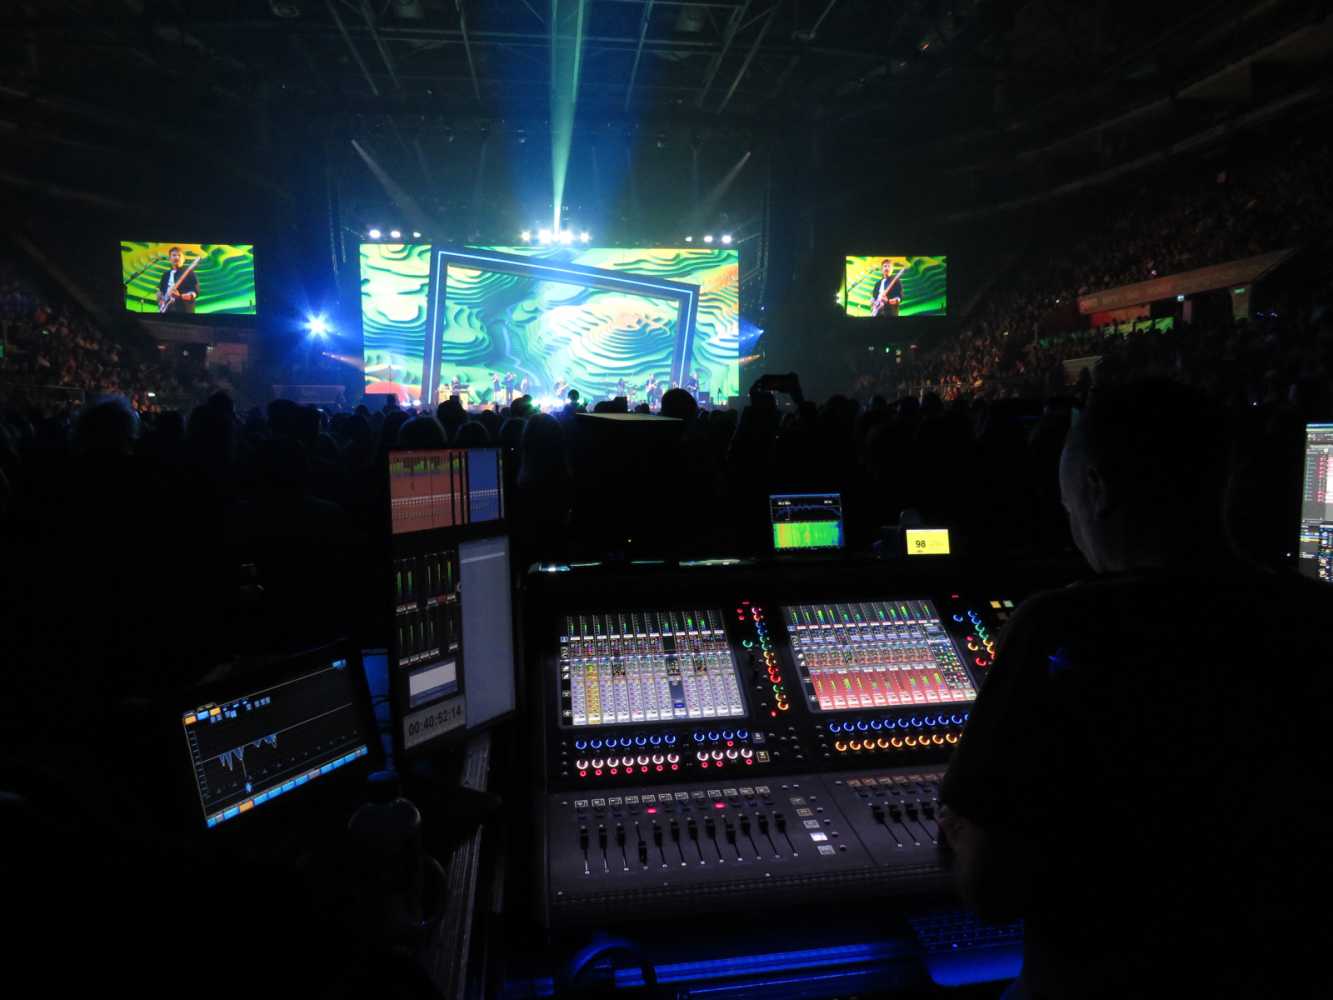 DiGiCo Quantum 338 consoles took up both the front of house and monitor positions